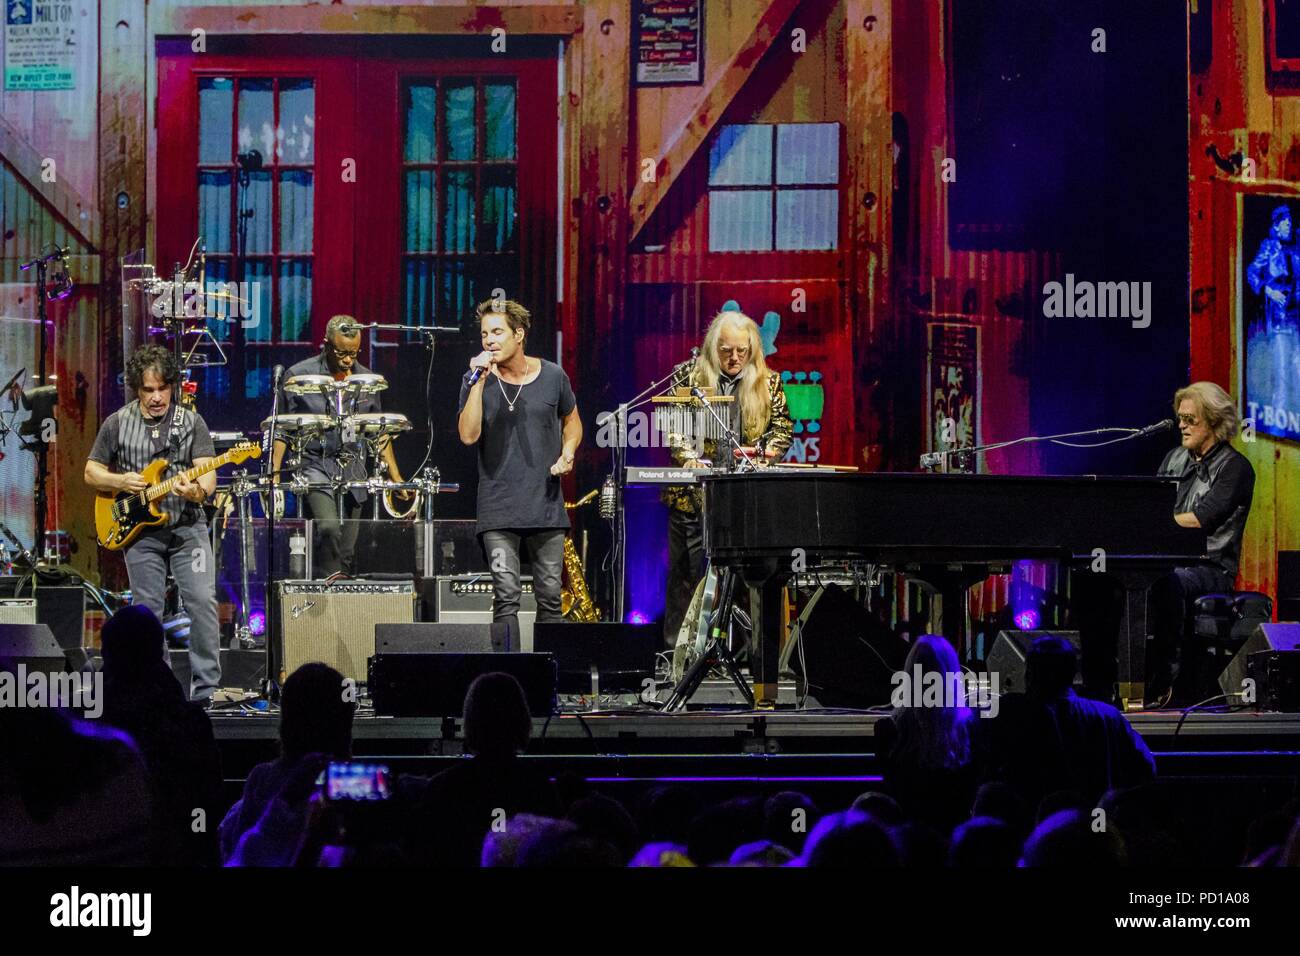 San Diego, California, USA. 4th Aug, 2018. PAT MONAHAN of Train joins DARYL HALL and JOHN OATES at Viejas Arena in San Diego, California on August 5, 2018 Credit: Marissa Carter/ZUMA Wire/Alamy Live News Stock Photo